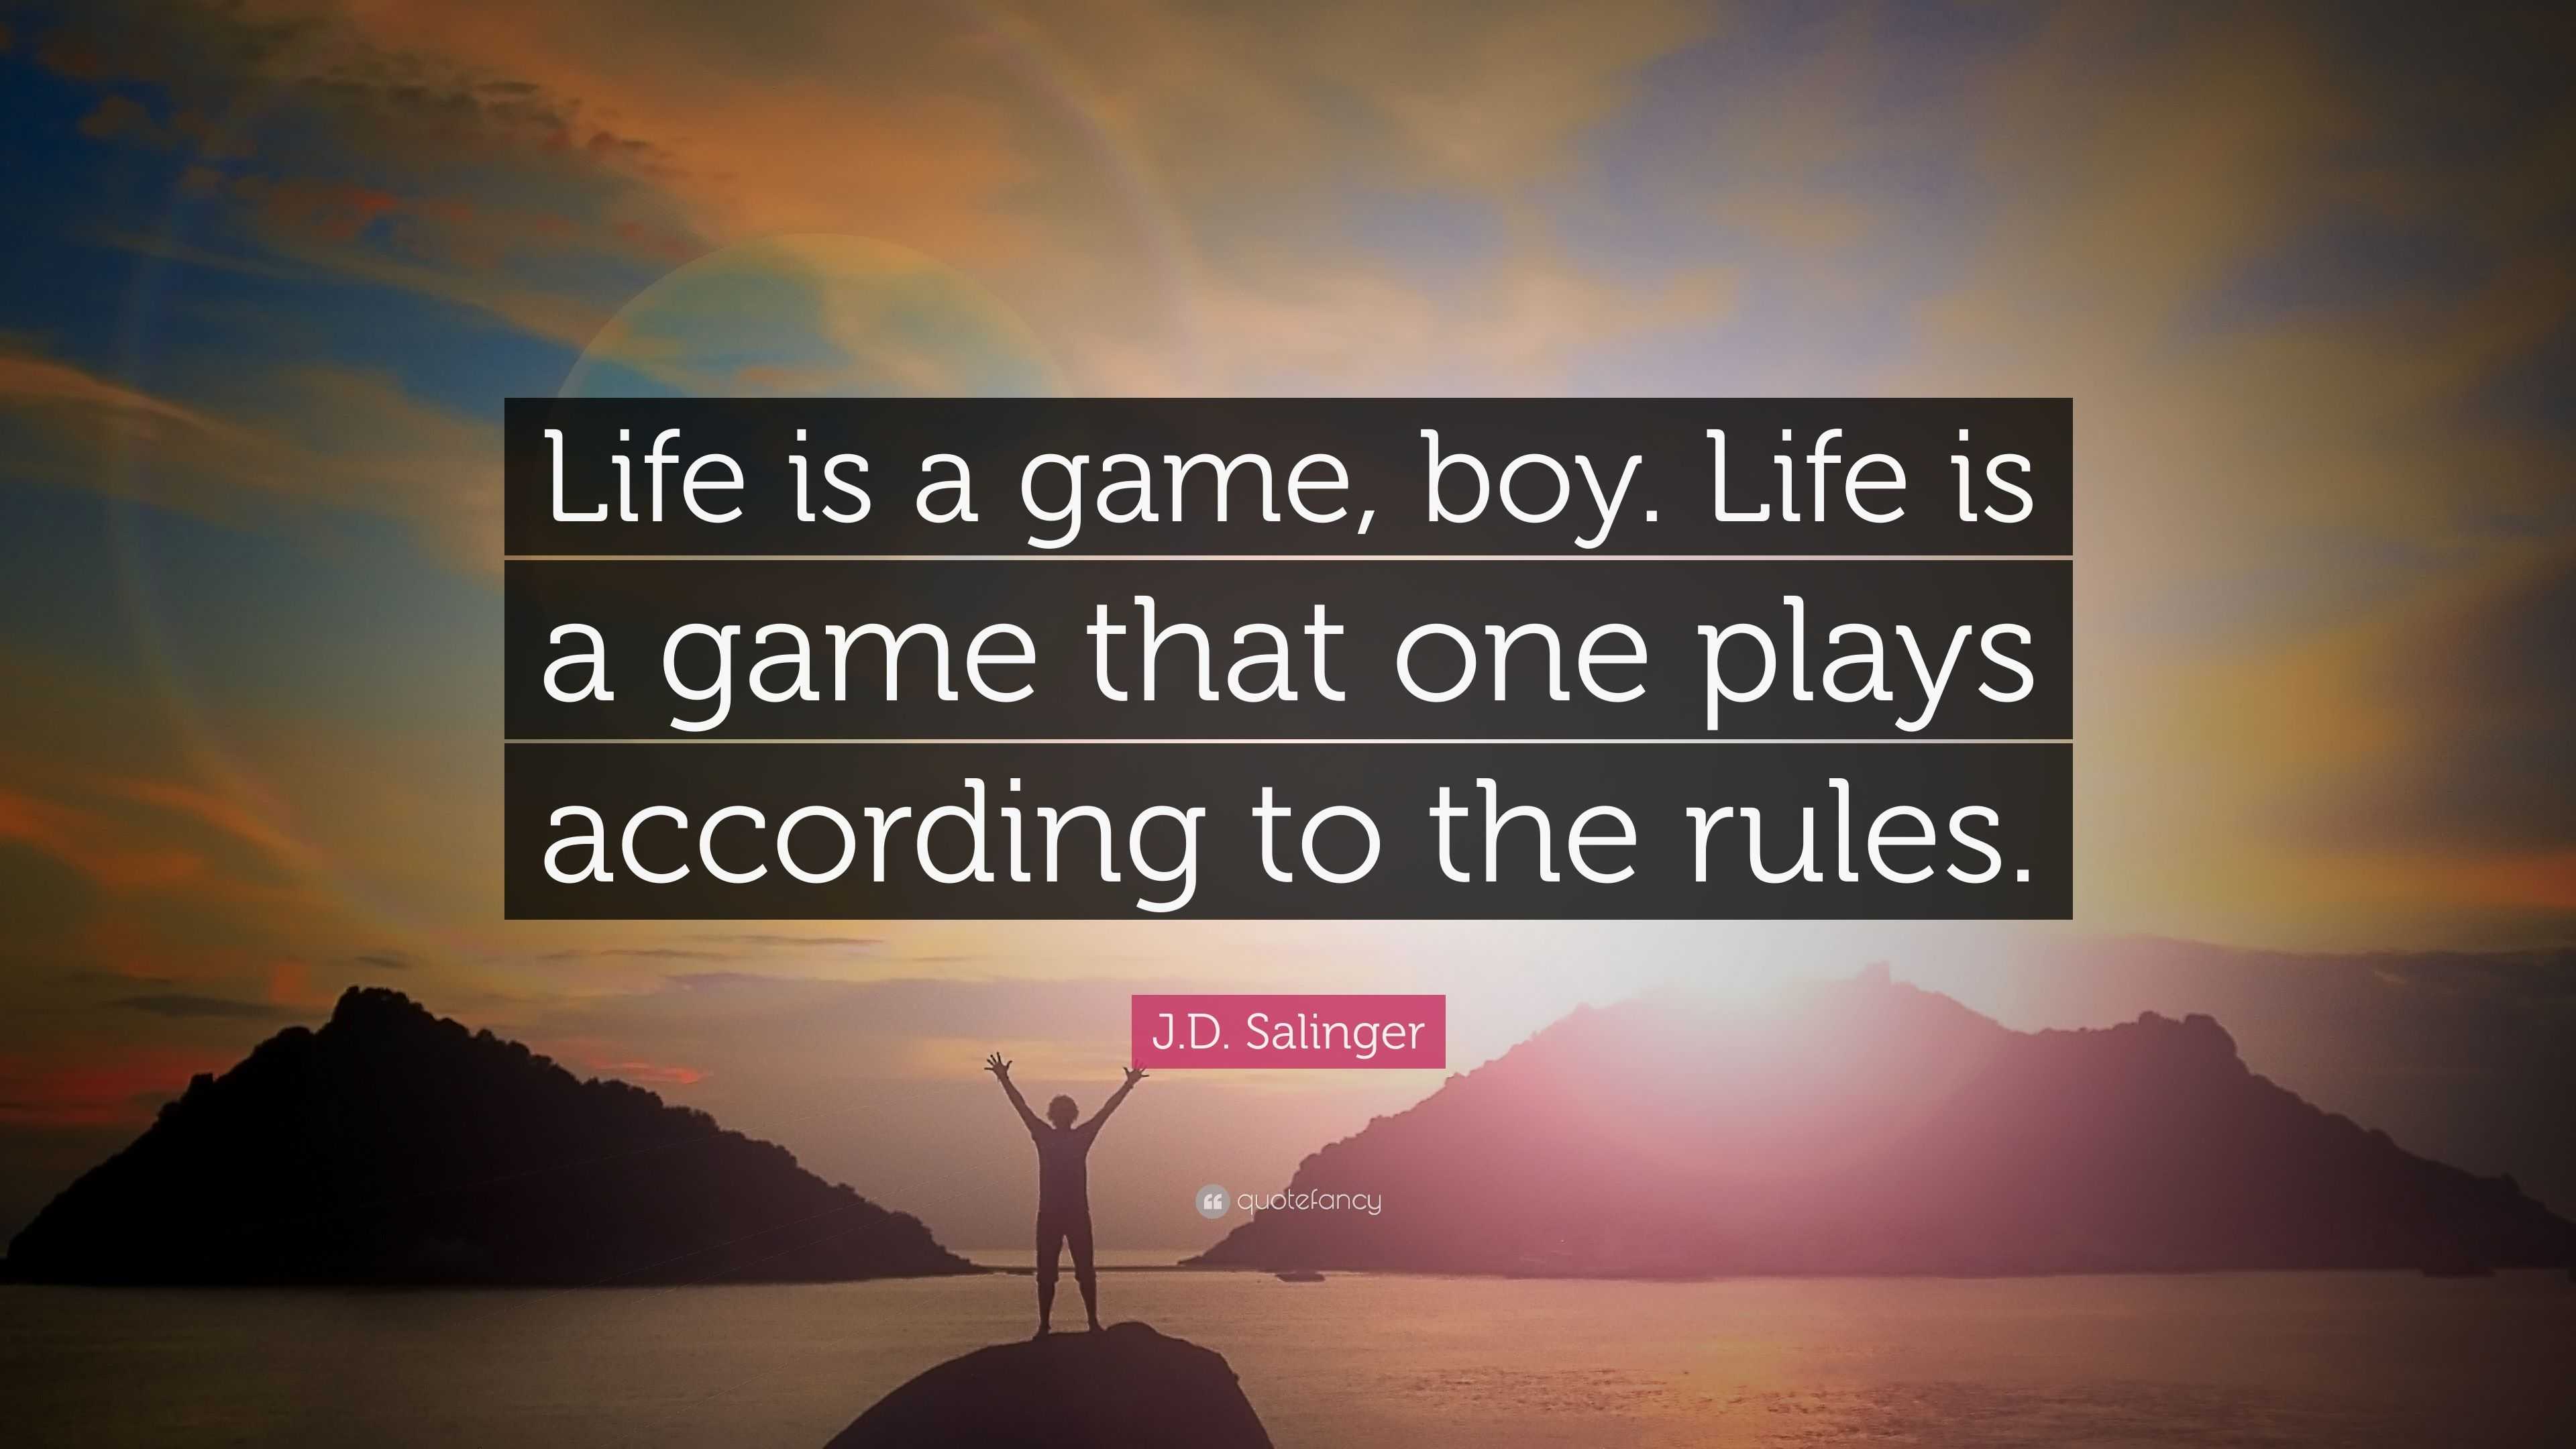 4811507 J D Salinger Quote Life Is A Game Boy Life Is A Game That One 